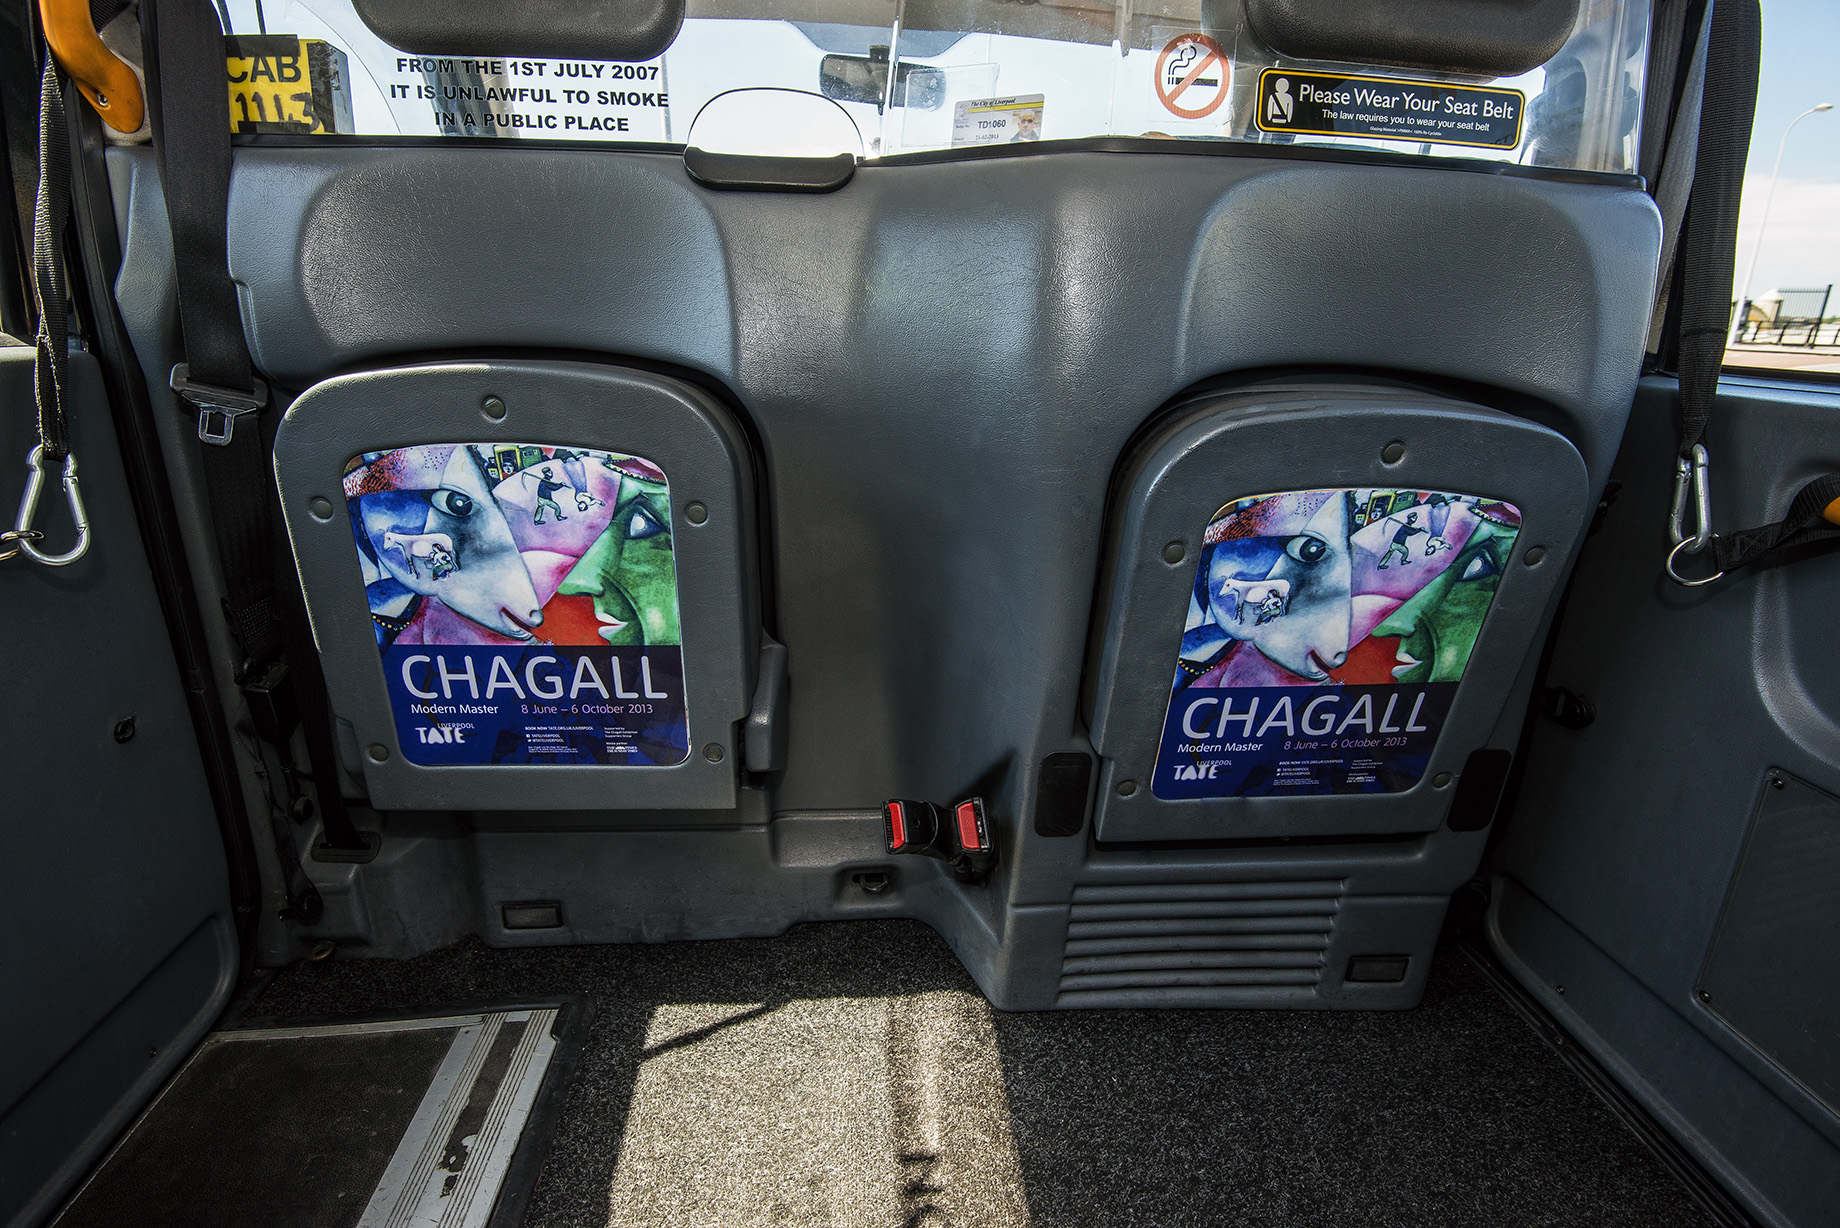 2013 Ubiquitous taxi advertising campaign for Tate Liverpool - Chagall - Modern Master